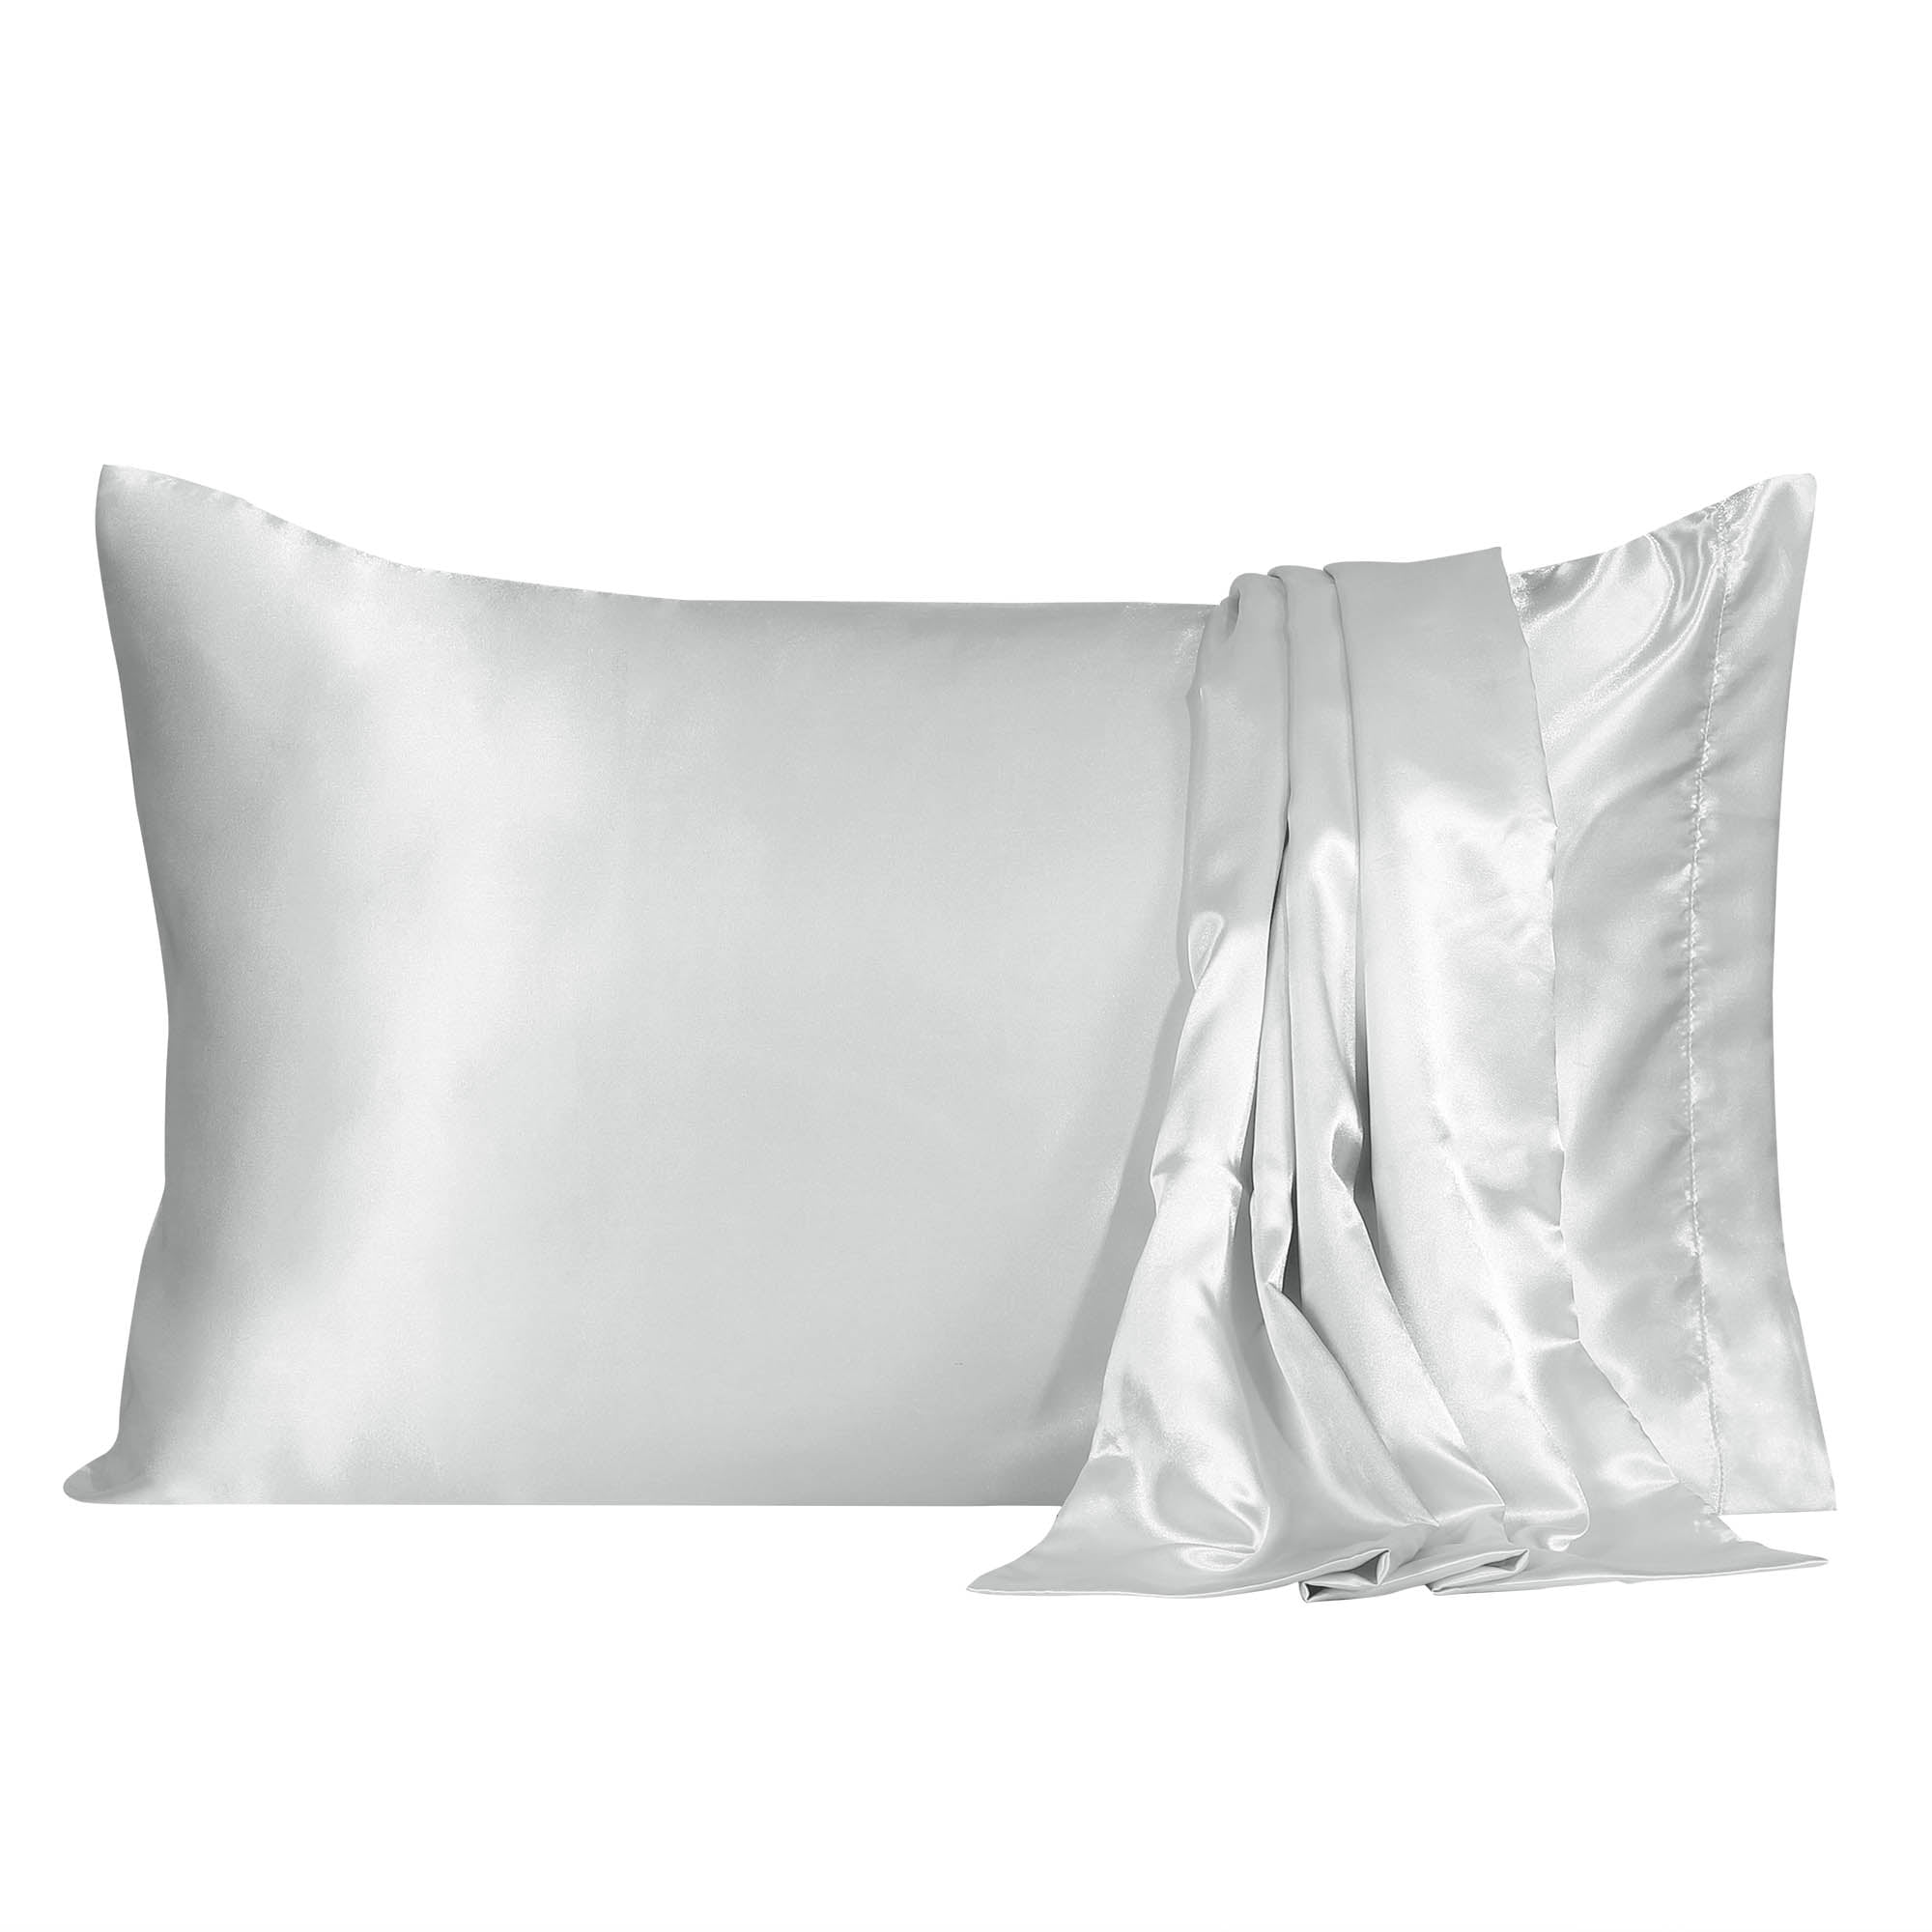 Details about   Slip Cooling Satin Pillow Cases Cover for Hair and Skin No Zipper Pillowcase 